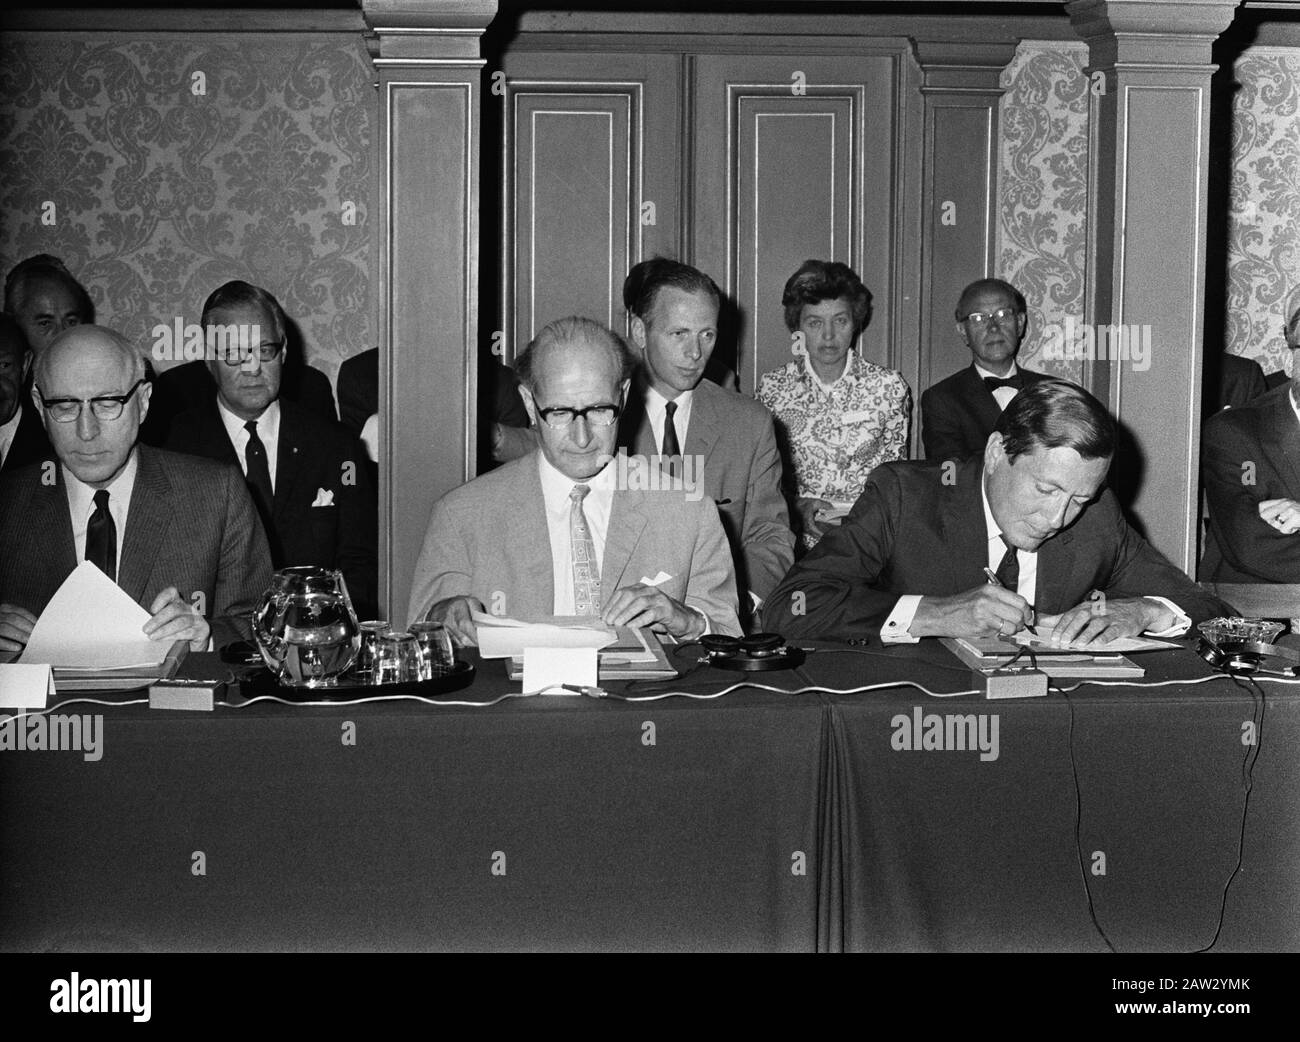 Pr. Claus at 6th General Assembly Europa Nostra building Kon.NL Acad. Knowing Adam burgm. Samkalden, Min. Schut, Prince Claus Date: June 12, 1969 Location: Amsterdam, Noord-Holland Person Name: Claus, prince Stock Photo